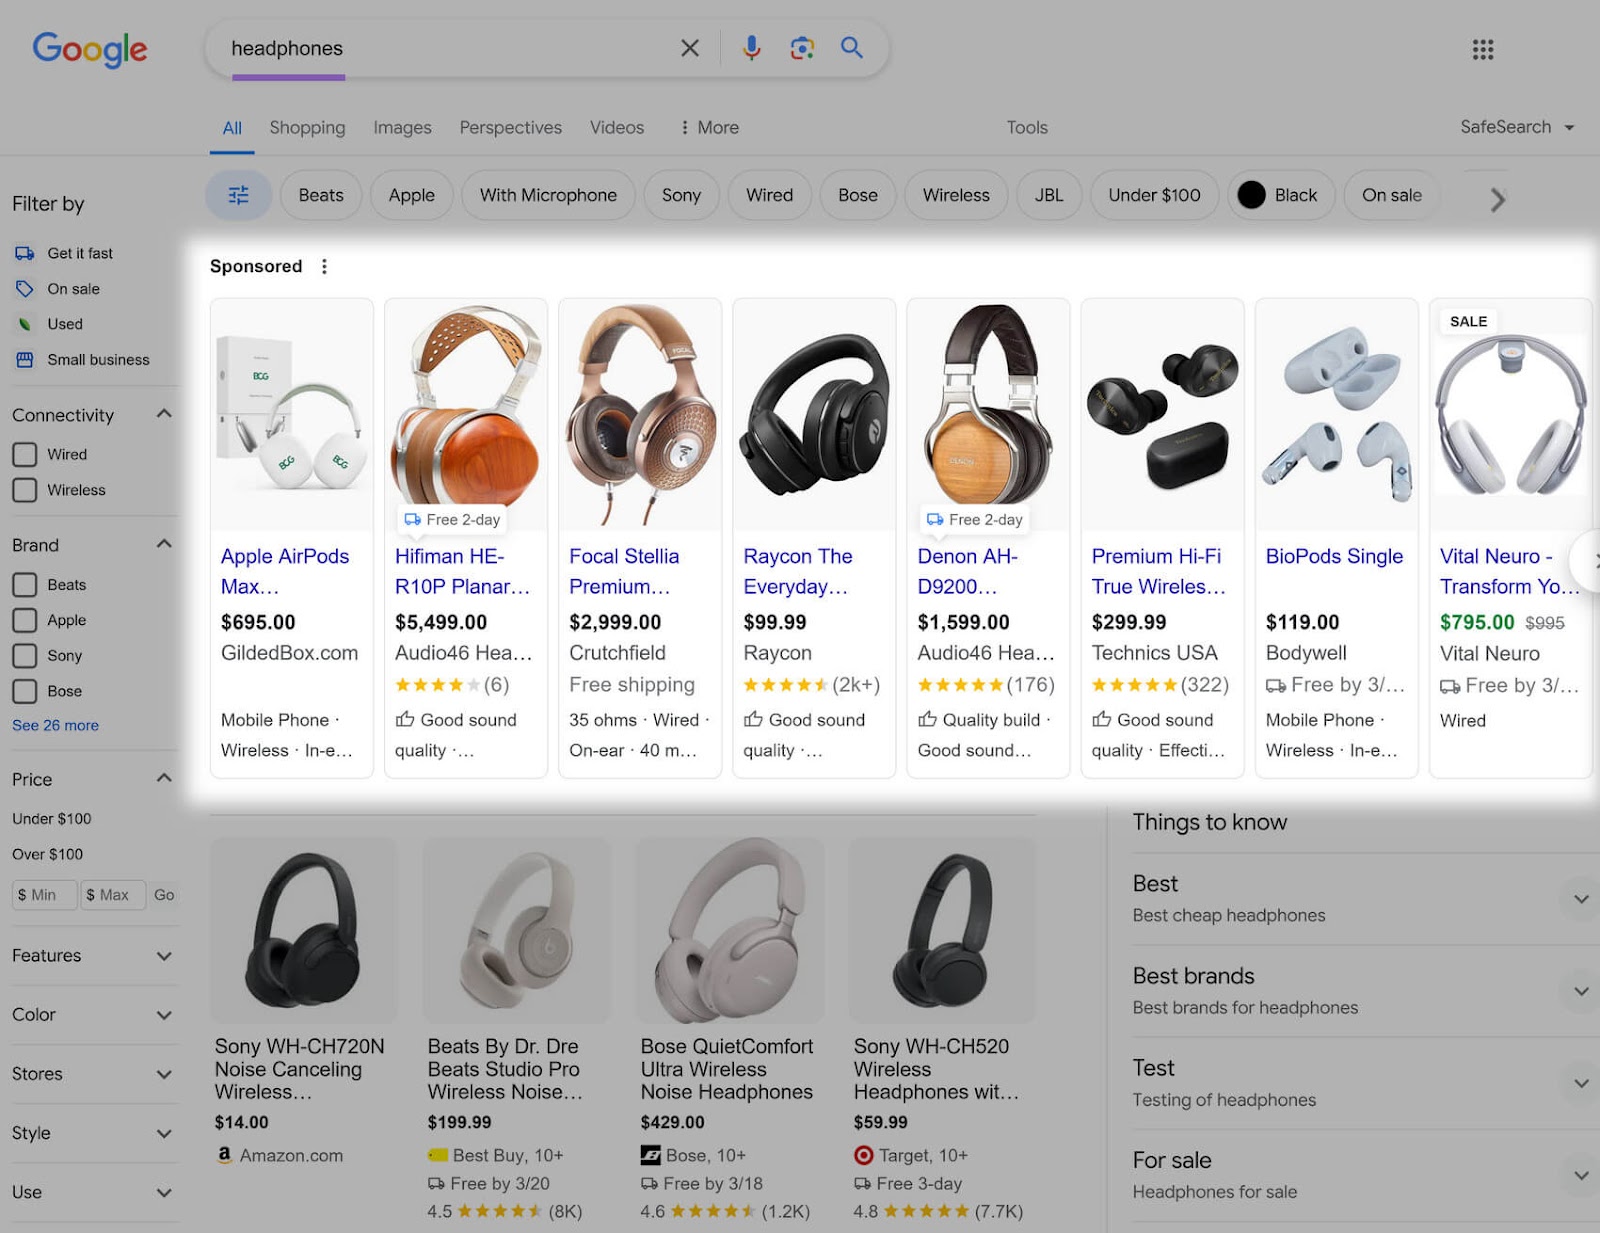 Product Listing Ads (PLAs) on Google SERP for